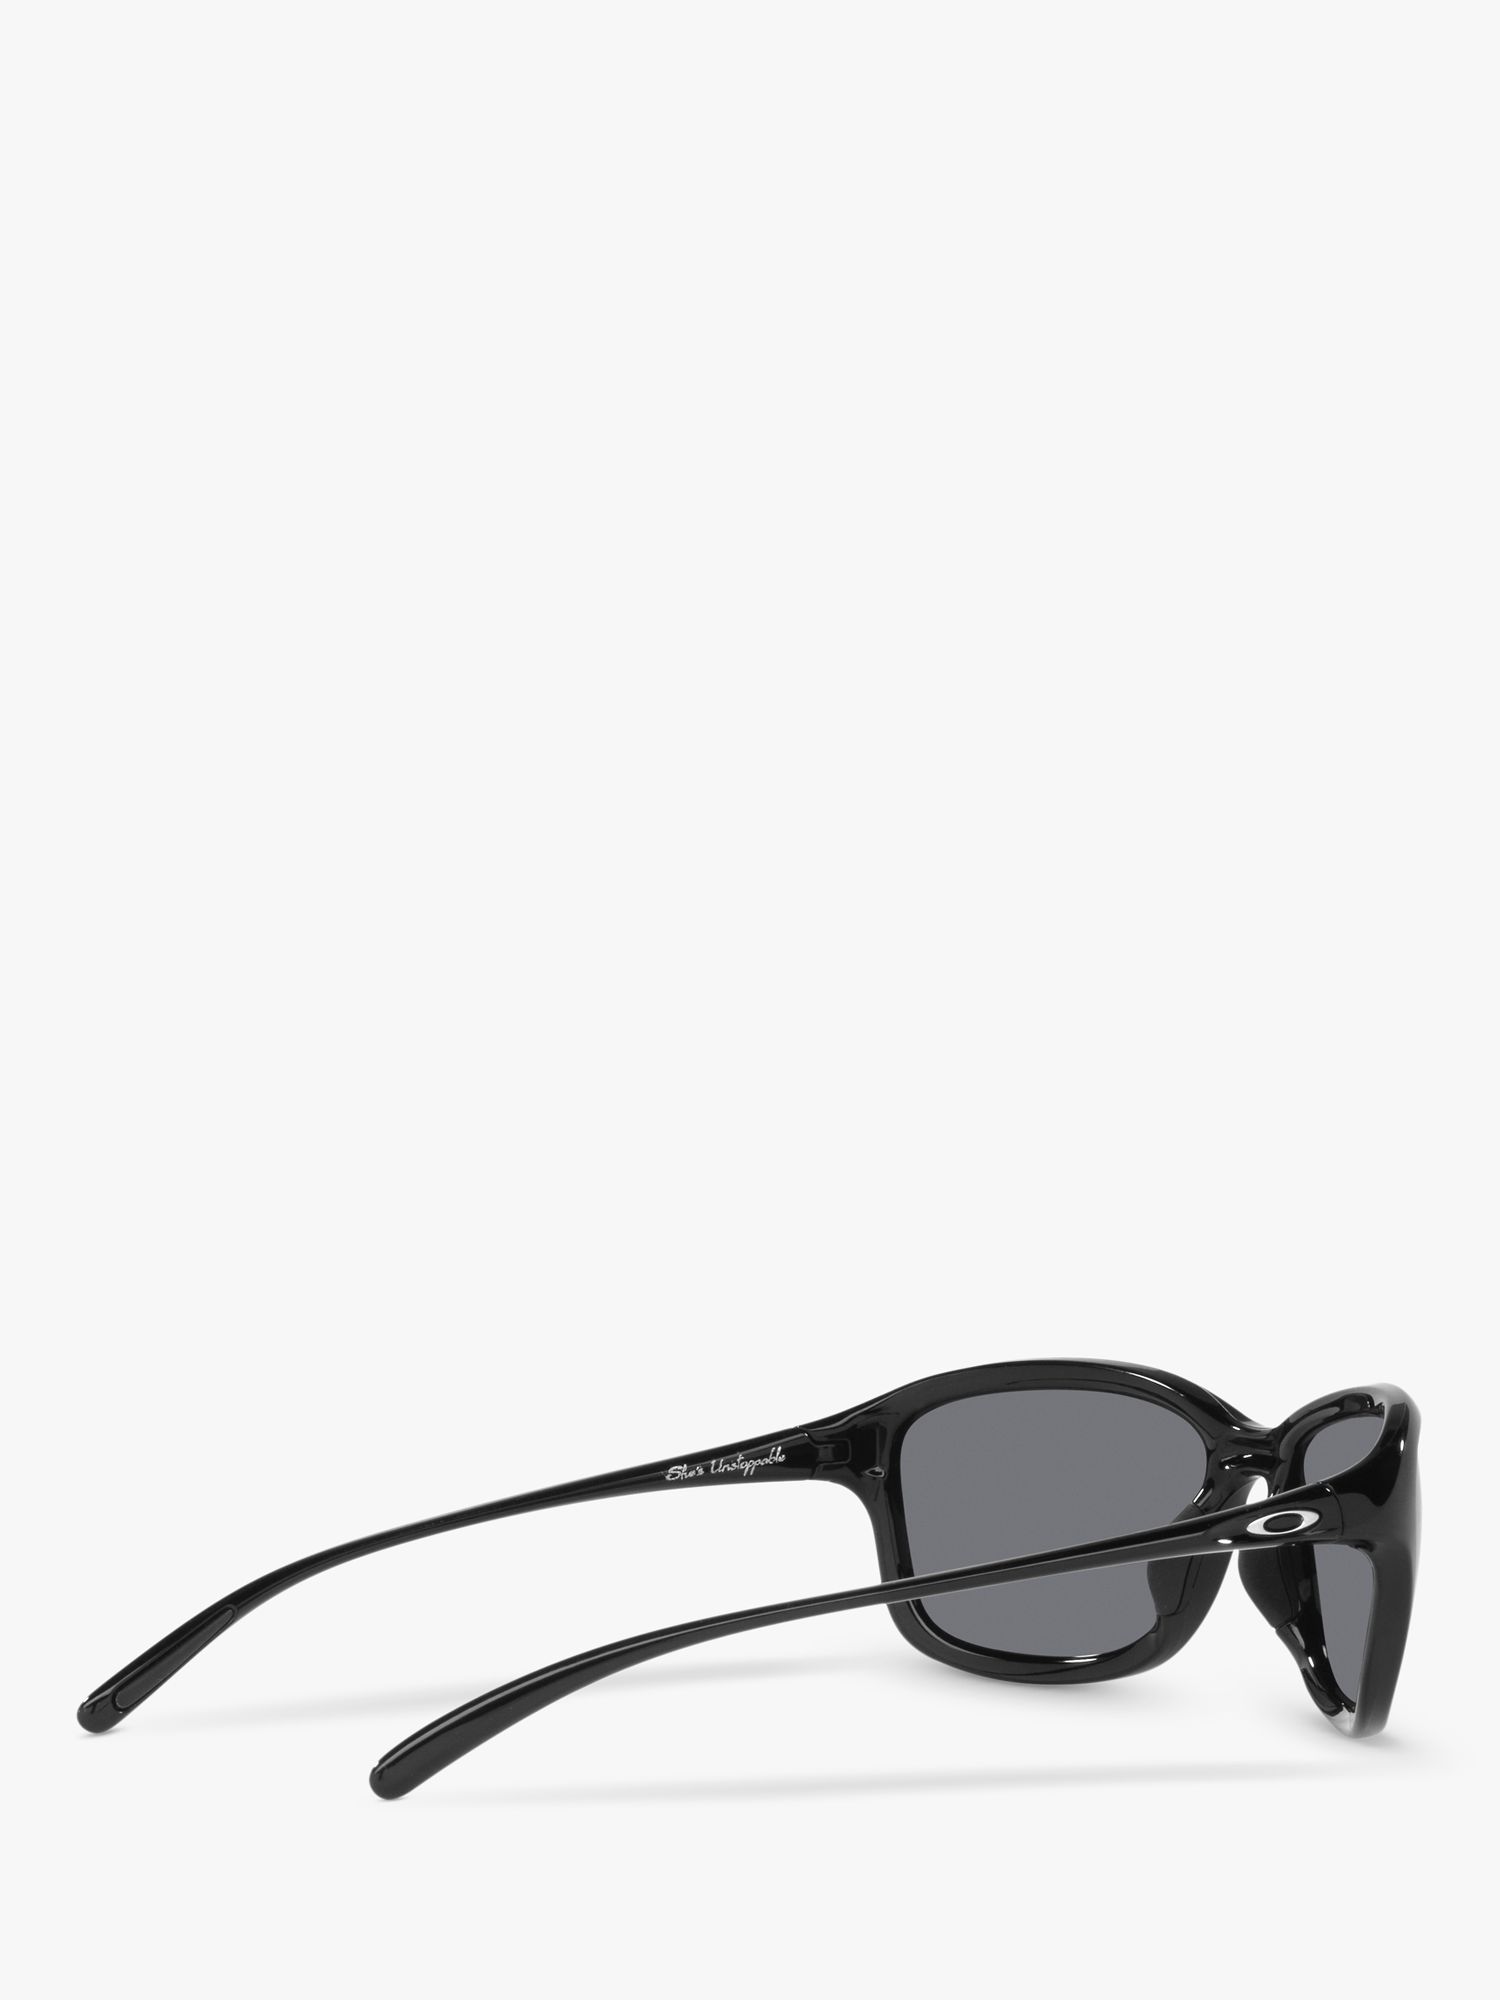 Buy Oakley OO9297 Women's She's Unstoppable Polarised Oval Sunglasses Online at johnlewis.com